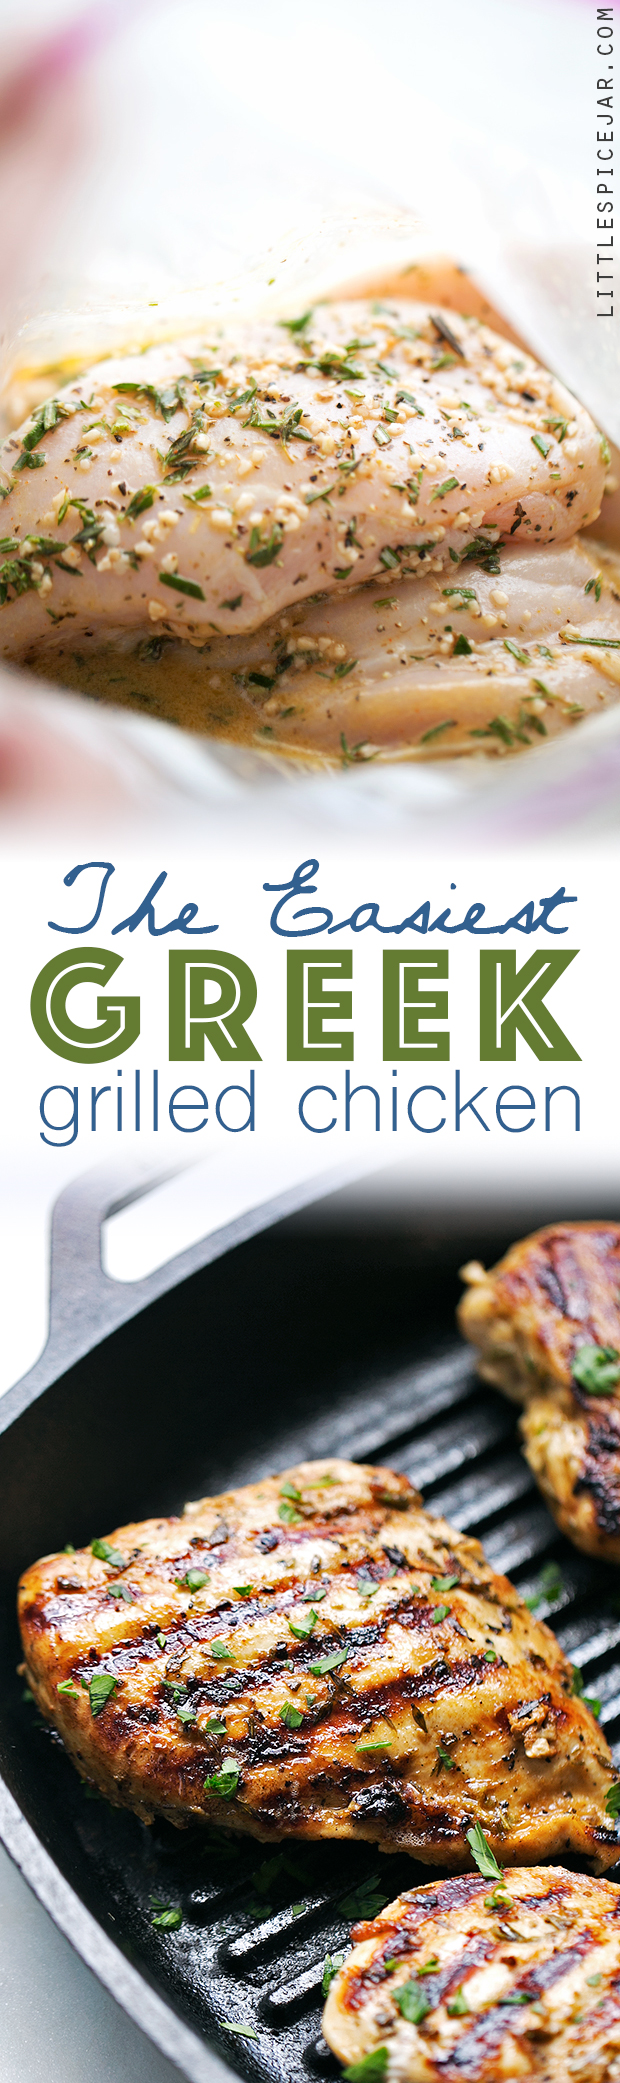 The Easiest Greek Grilled Chicken - 10 simple ingredients in this tender and juicy greek marinated chicken! Loaded with protein and perfect for meal prepping! #mealprep #grilledchicken #greekchicken #greekgrilledchicken | Littlespicejar.com